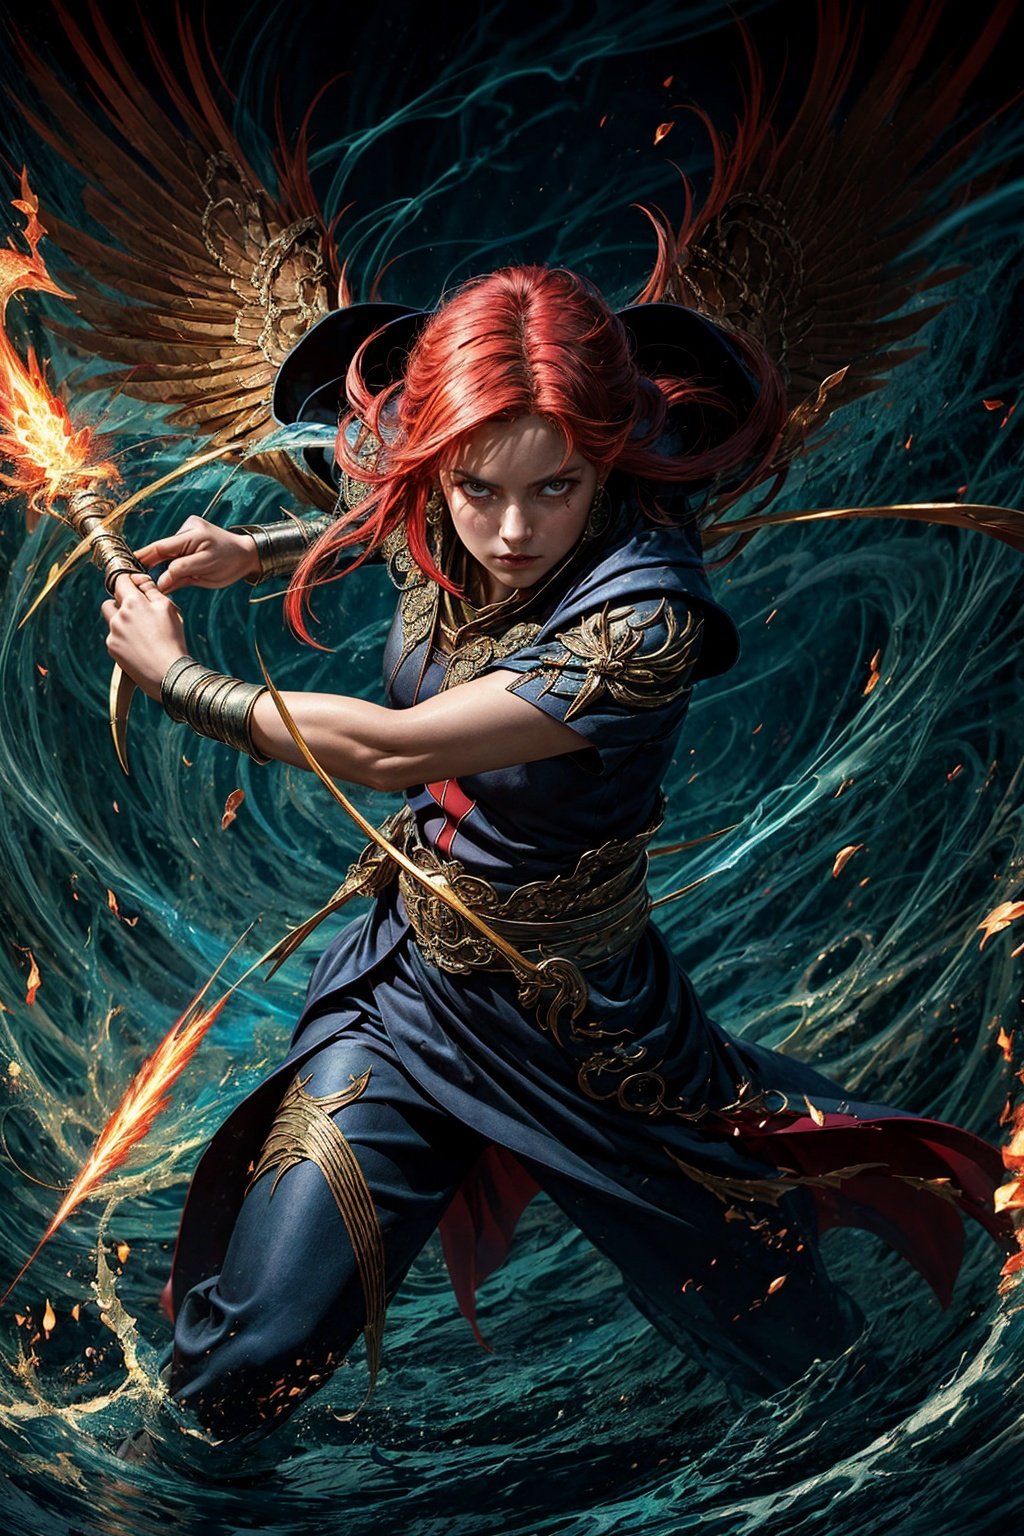 From the depths of mystique arises a rogue wizard of red lightning—scales shimmering, intricate wings unfurling with delicate grace. Crafted with intricate detail, she spirals amid a dance of sparks and smoke—an embodiment of elemental prowess.

Wielding a weapon of red lightning, she commands the electrifying forces with a master's touch. Wings beat, creating ripples in reality itself, bending elements to her will.

Her eyes hold a fusion of determination and cunning as she surveys her realm. Beauty and danger entwine, a captivating paradox that draws you into her compelling presence. In this scene, nature and artistry merge—a fantastical spectacle where the very elements bow to her arcane might.
Her hourglass shape evokes balance, wielding a weapon of red lightning—a symbol of her electrifying essence. Wings beat, rippling the world around her, bending elements to her command.

Peer into her eyes, a fusion of resolve and cunning, as she claims her dominion. Beauty and danger intertwine, an enchanting paradox pulling you into her compelling presence. In this scene, nature and artistry meld, where the fantastical ignites in a display of electrifying grandeur.,DonMV01dm4g1c